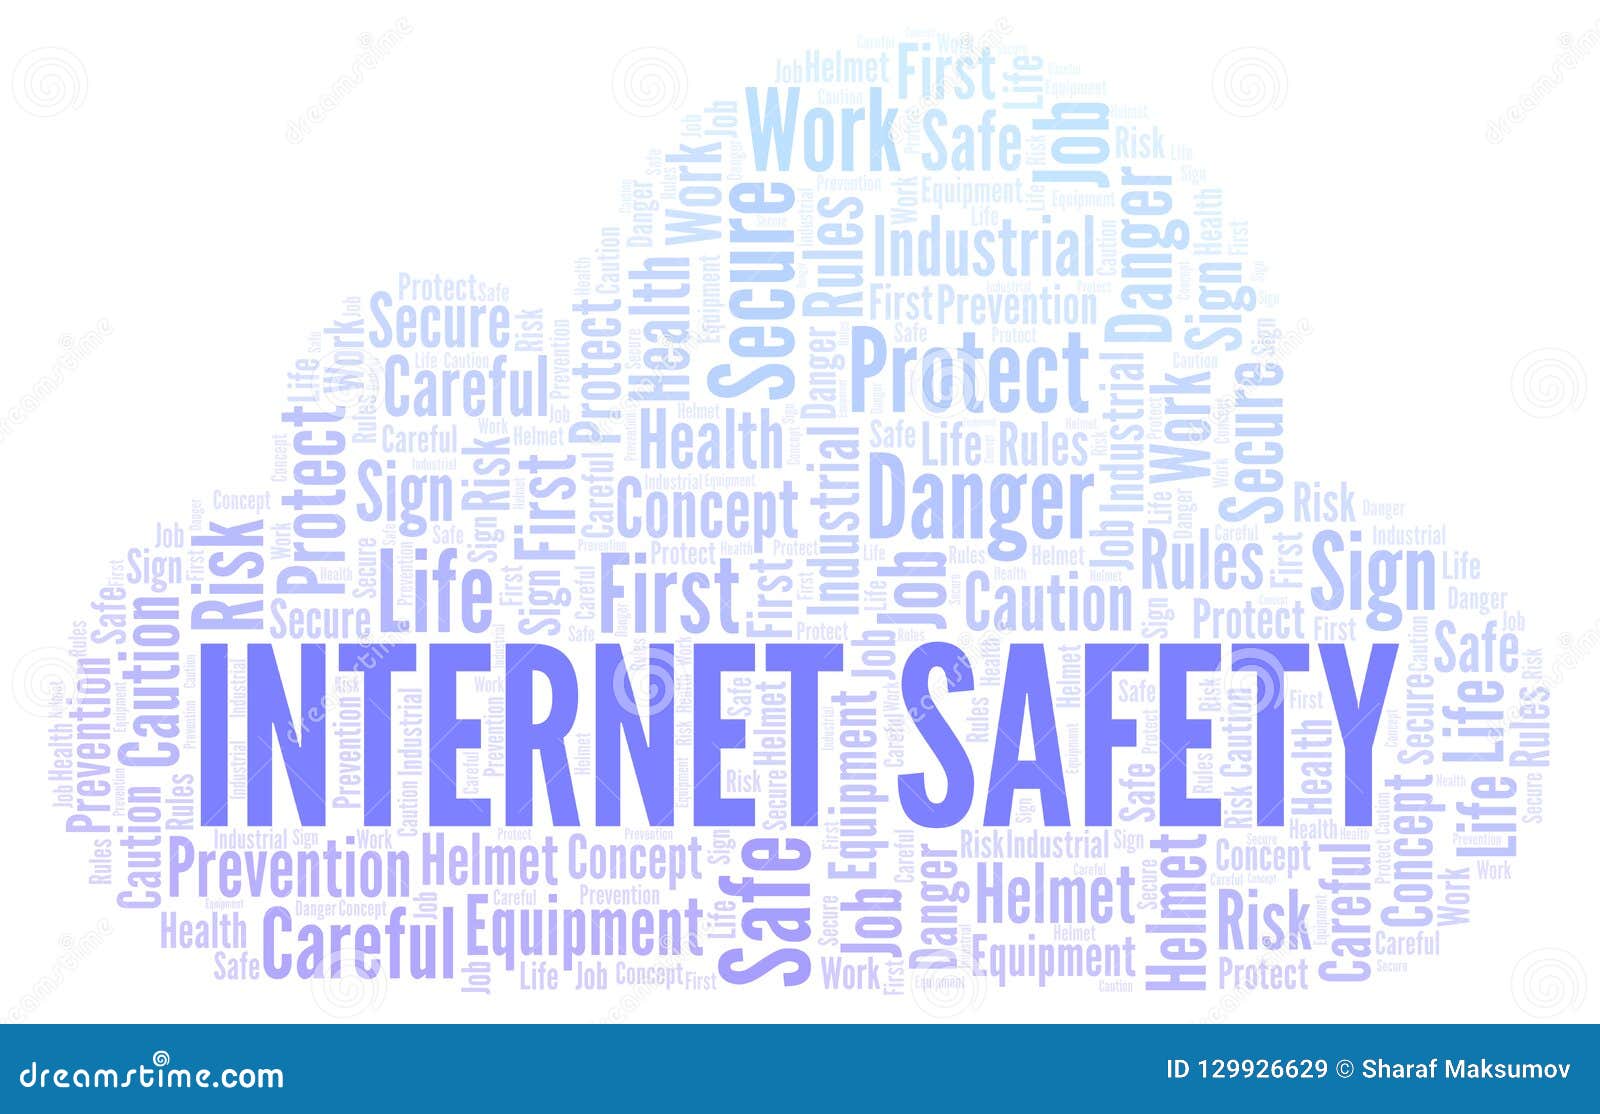 Safety internet rules of Top 15